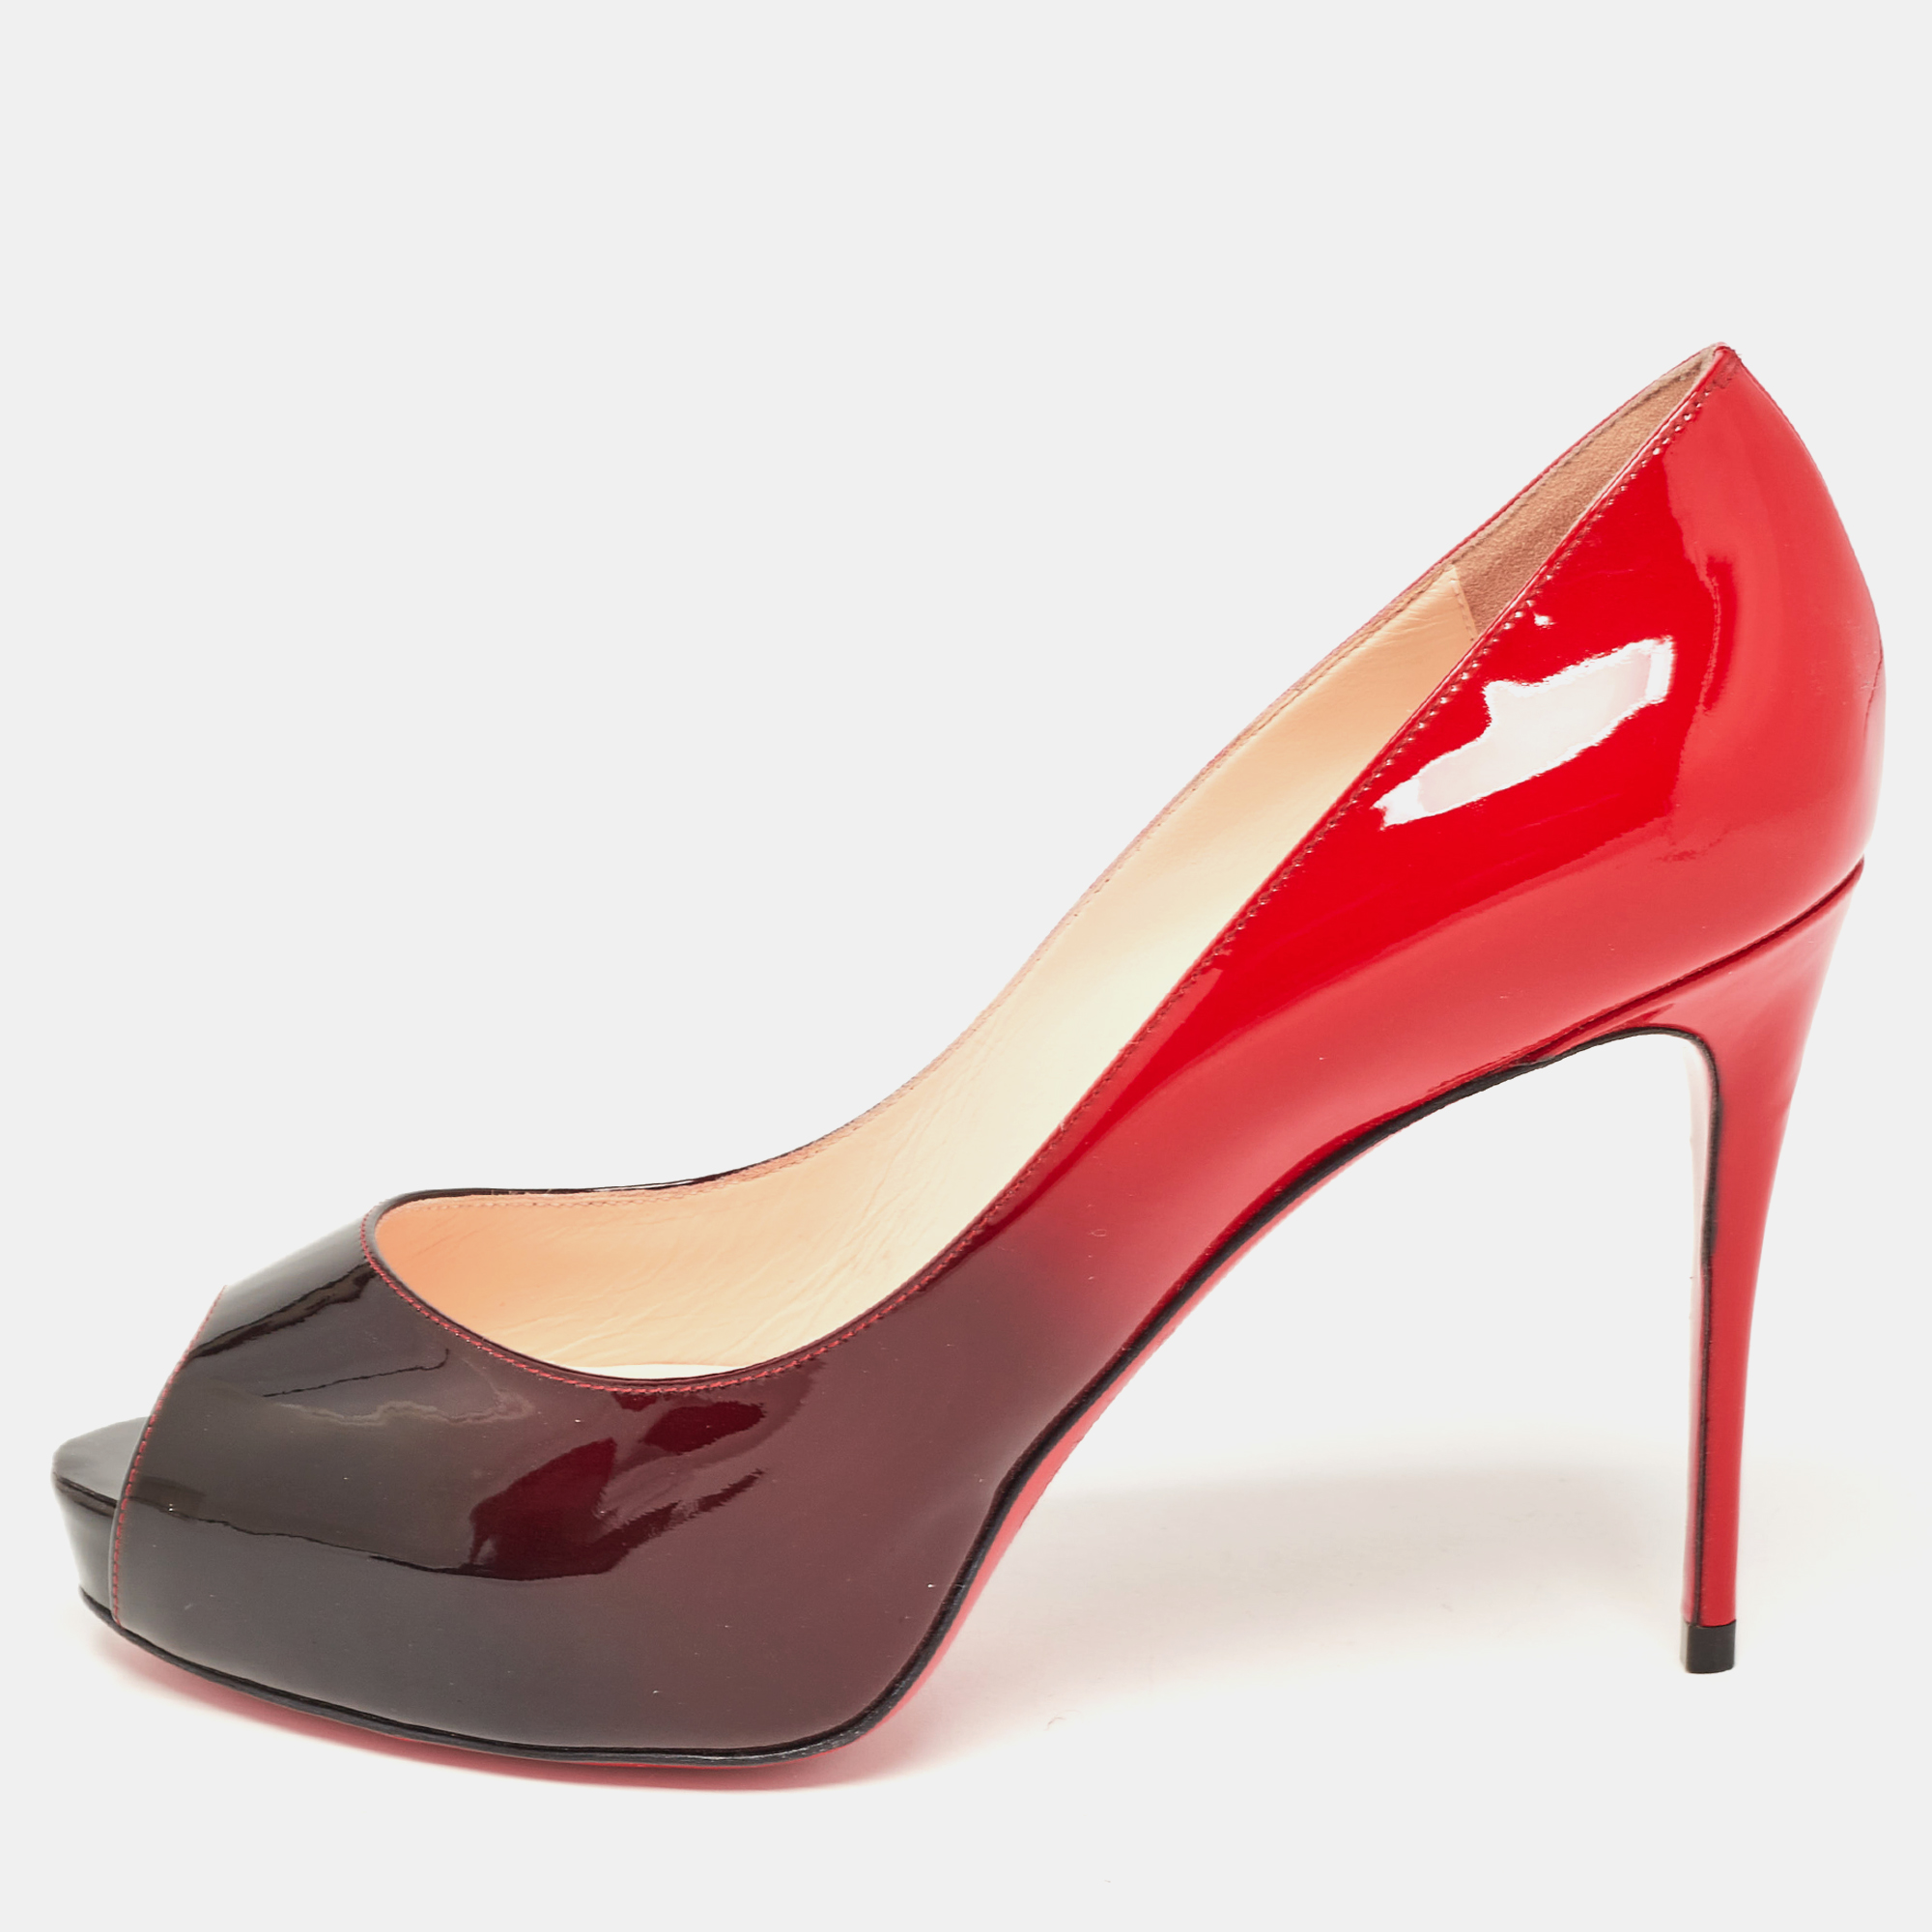 Christian Louboutin Red/Black Patent Very Prive Pumps Size 37